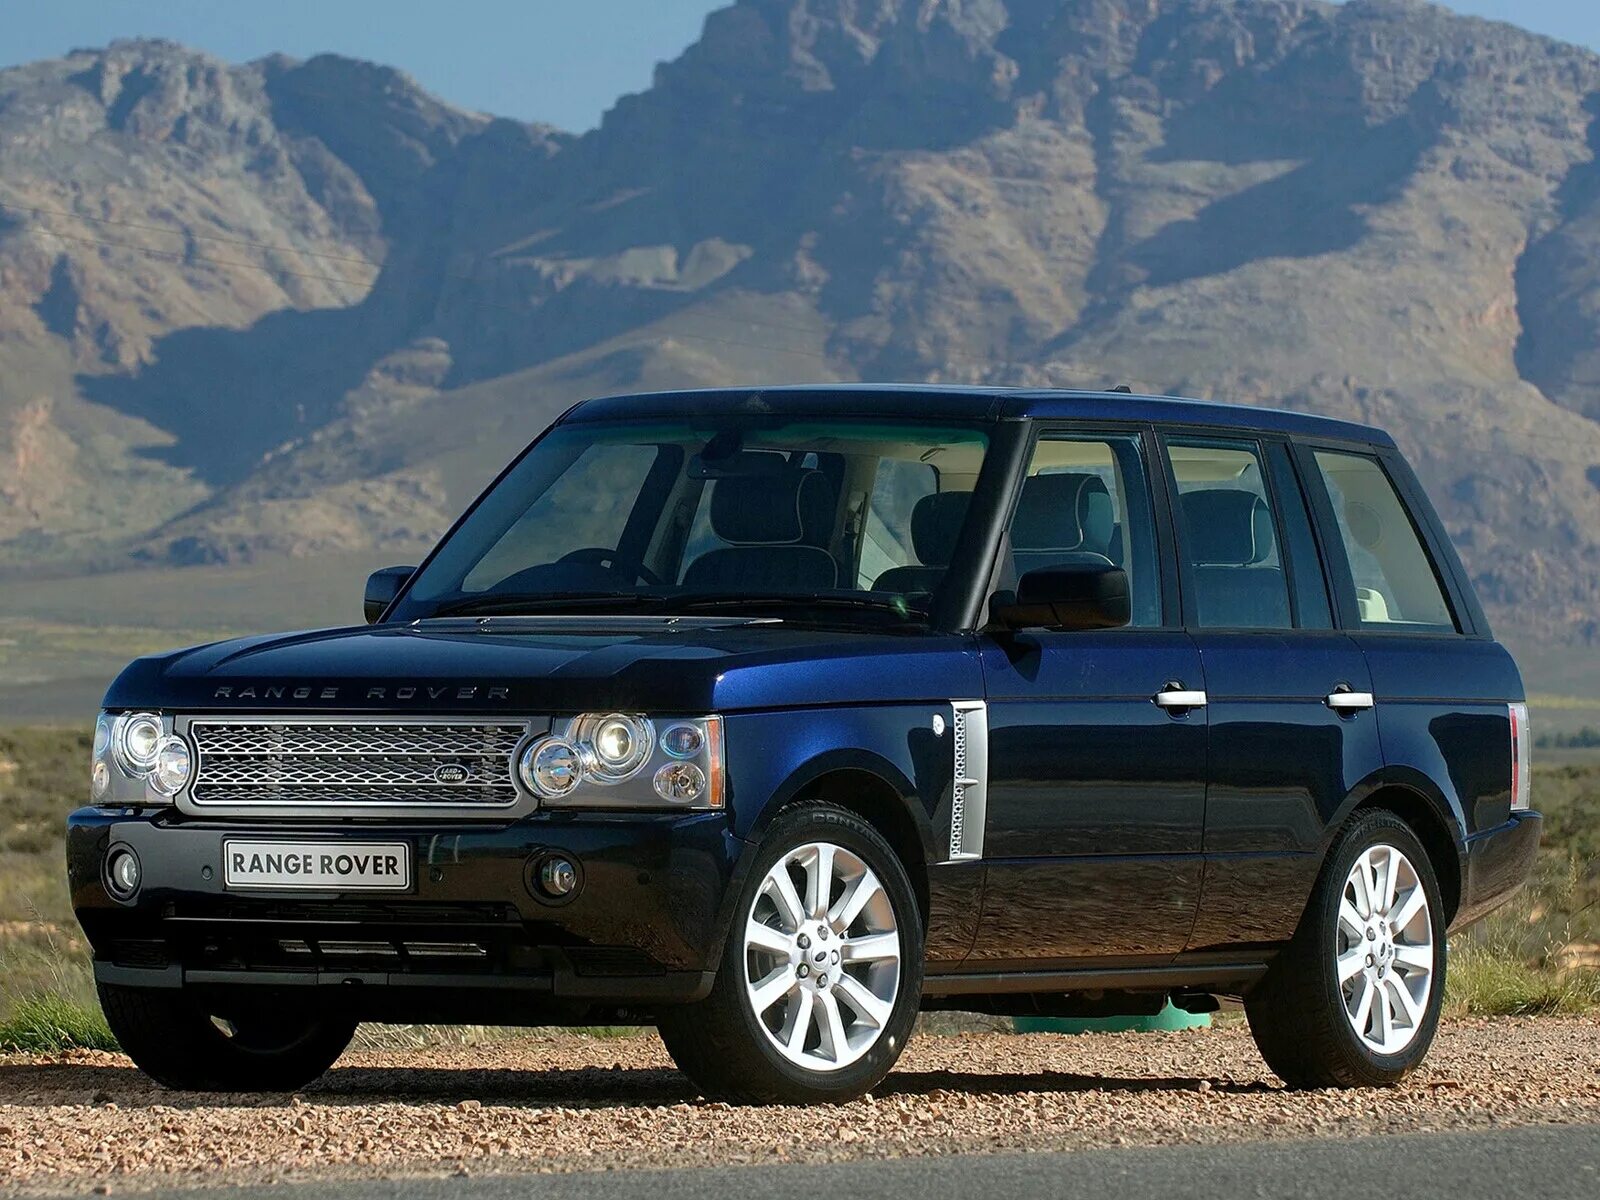 Рендж Ровер l322. Рендж Ровер 3. Лэнд Ровер Рэндж Ровер. Range Rover III (l322). New rend